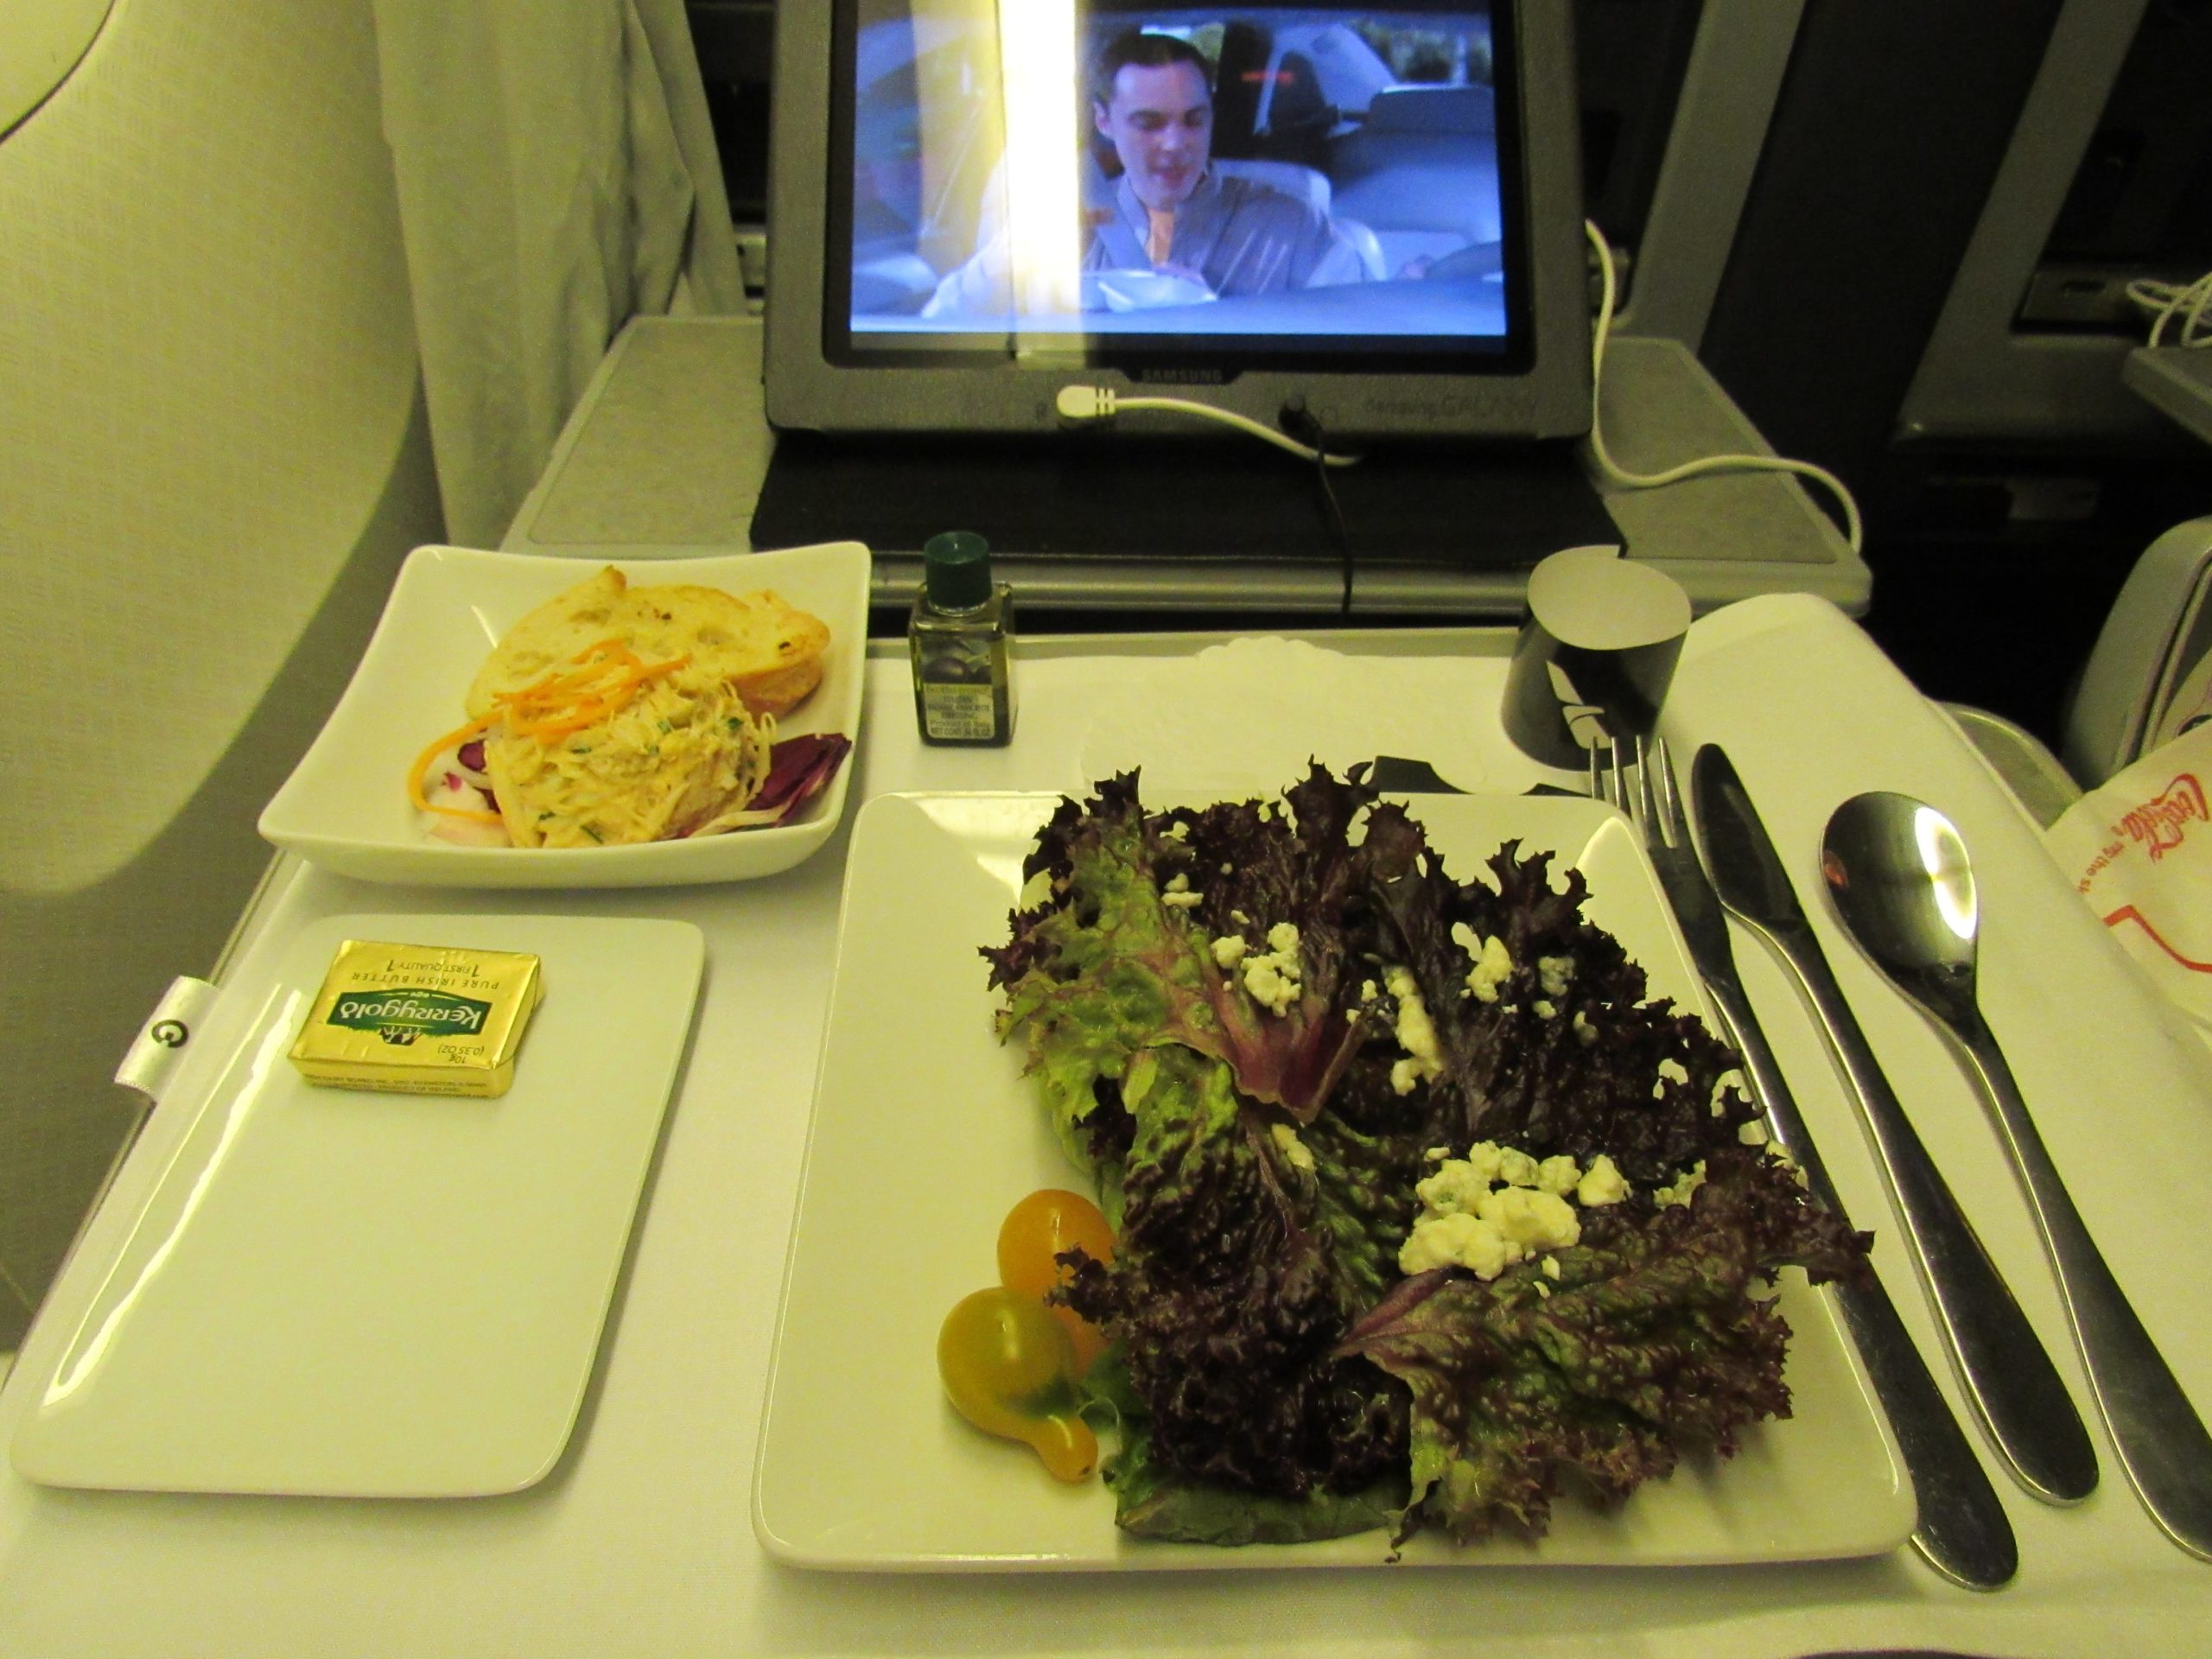 Appetizer and Salad American Business Class to Hawaii